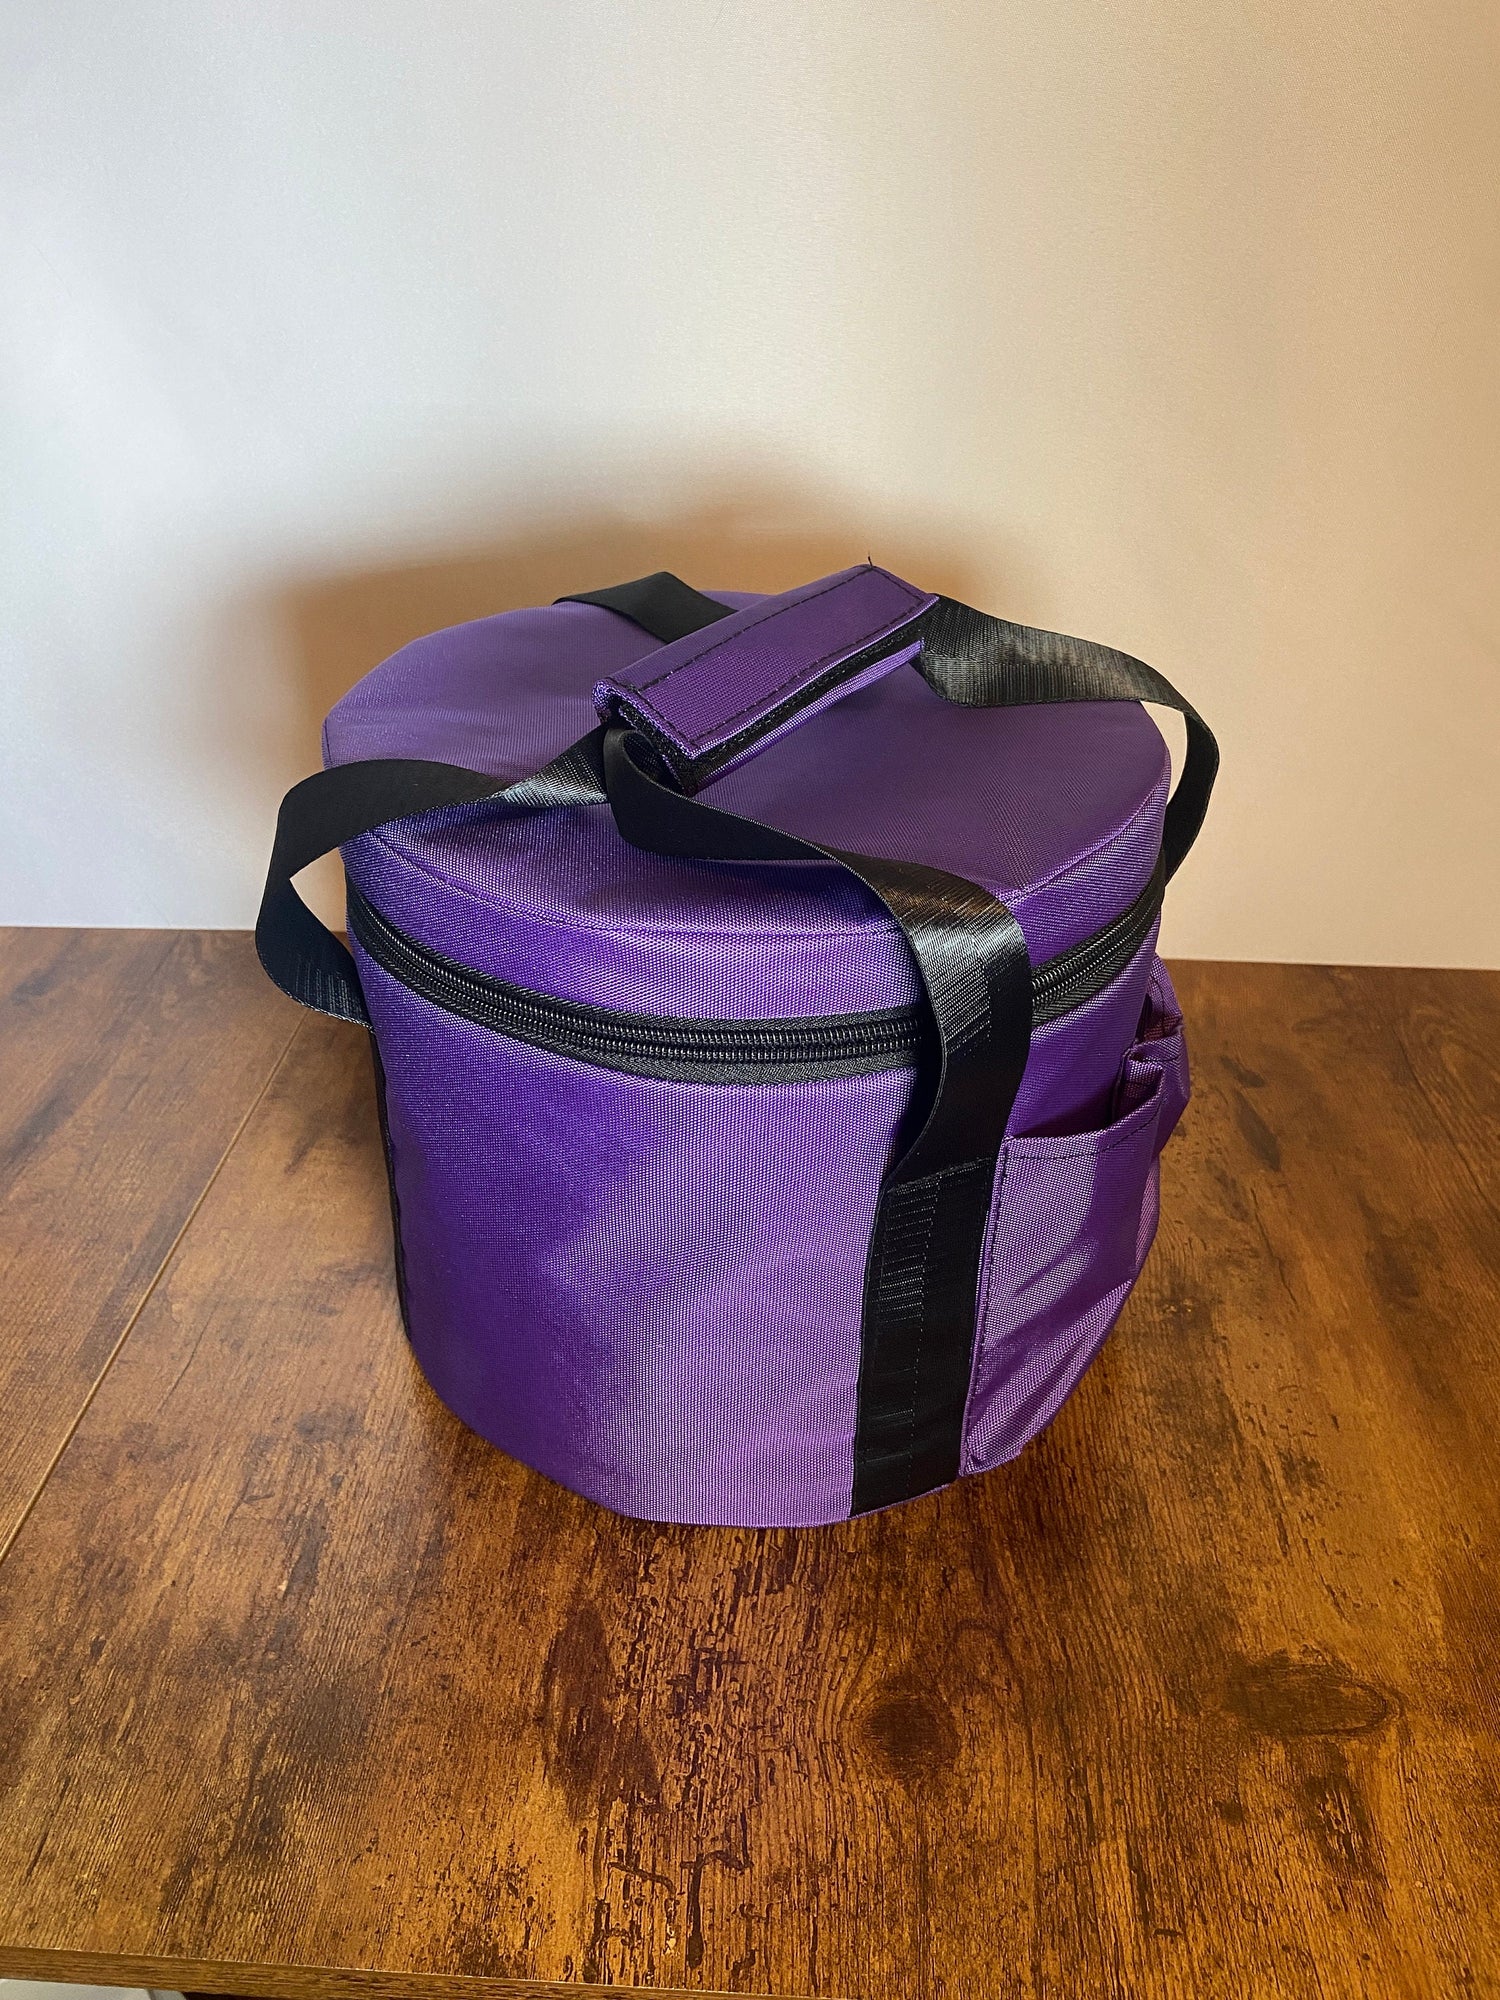 528 Hz Gravity Bowl and 432 Hz Chakra Printed Bowl - Tuning Fork - 8” Bowl, 7” Bowl, Purple Padded Carry Case, Suede Striker, and O-ring